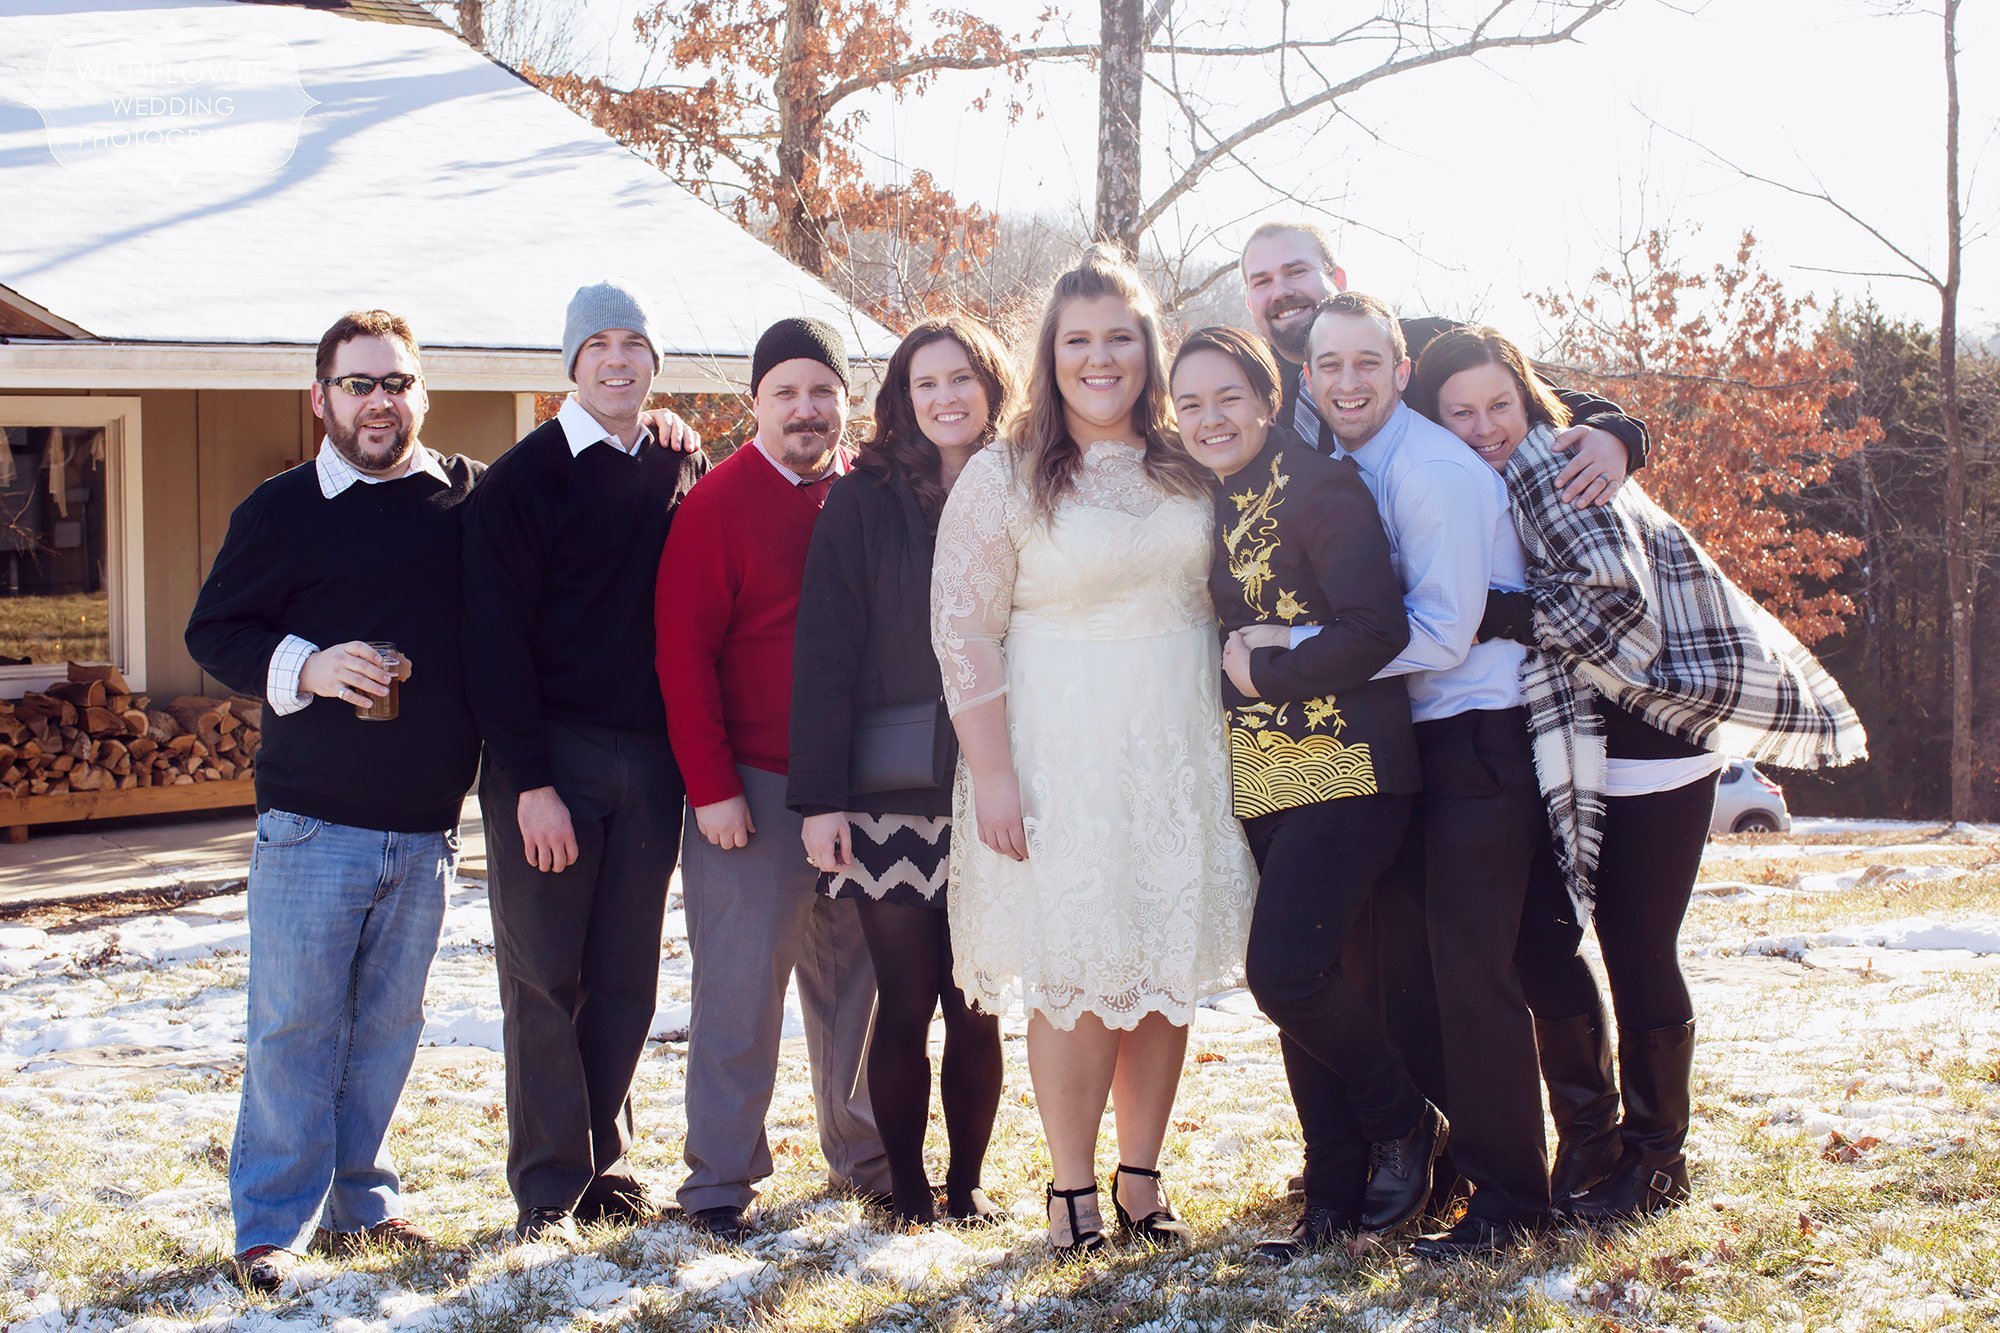 Group photo of friends after this winter wedding in Columbia, MO.